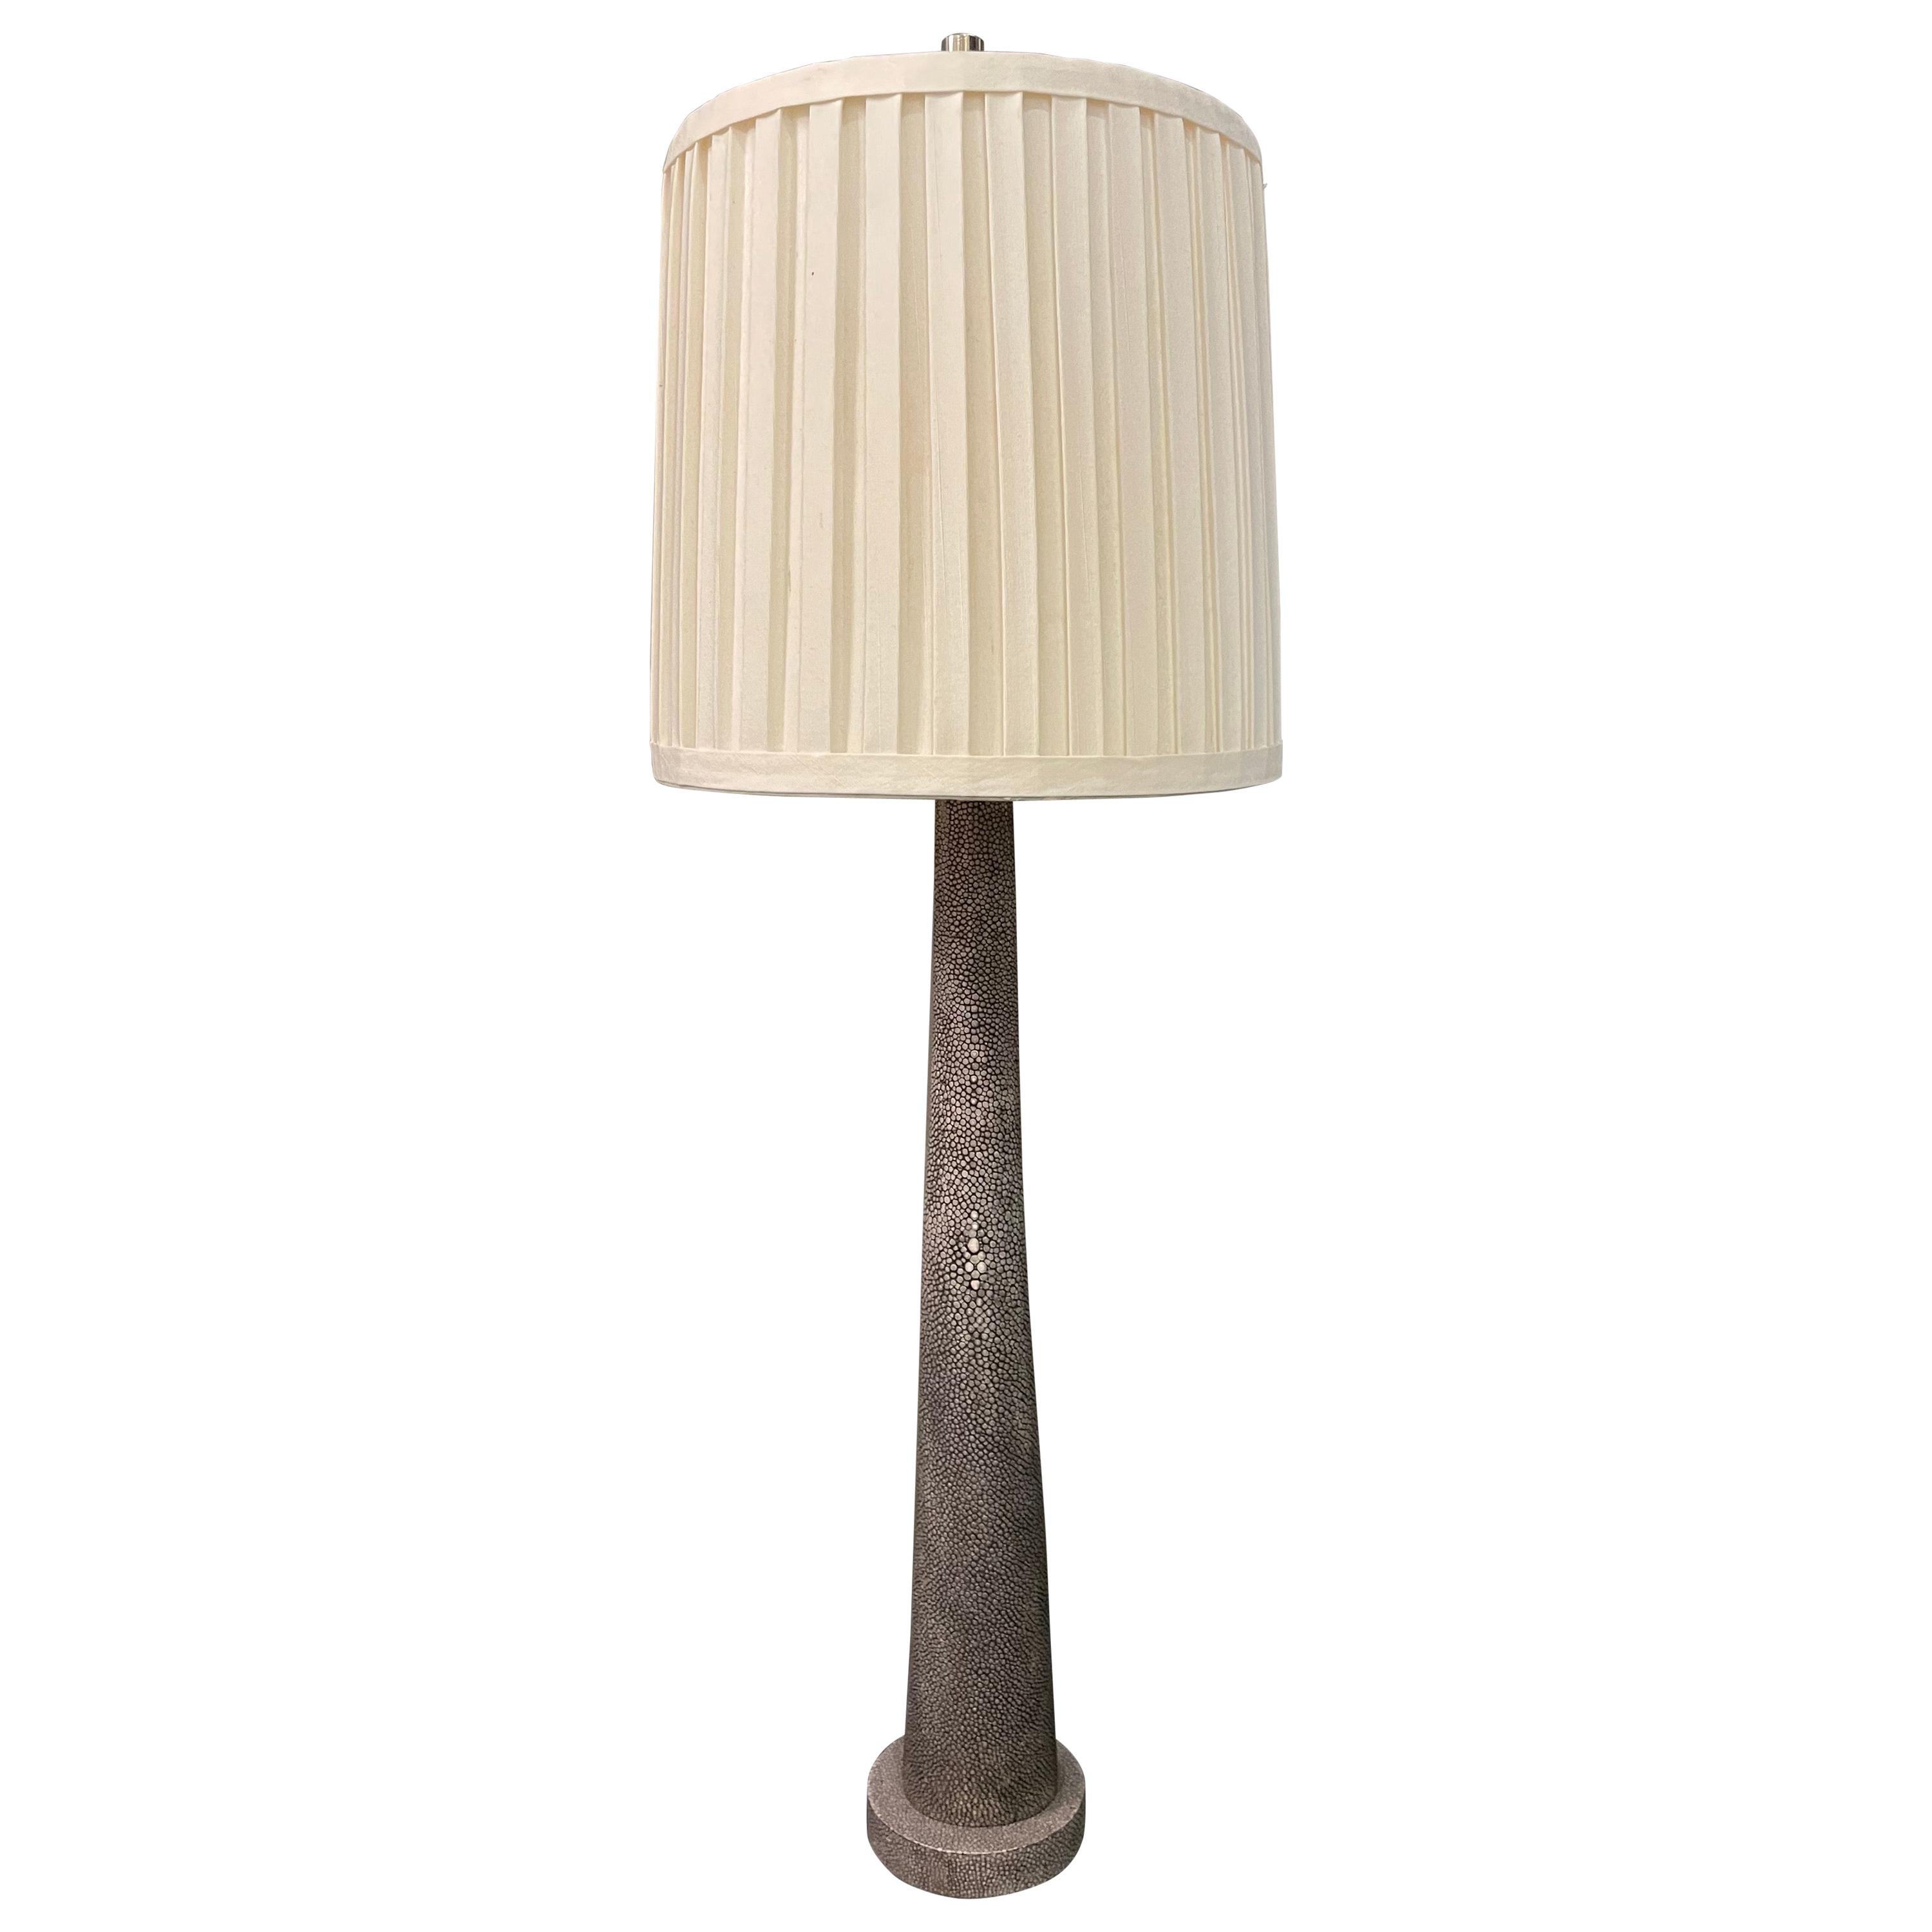 Shagreen Clad Organic Table Lamp For Sale